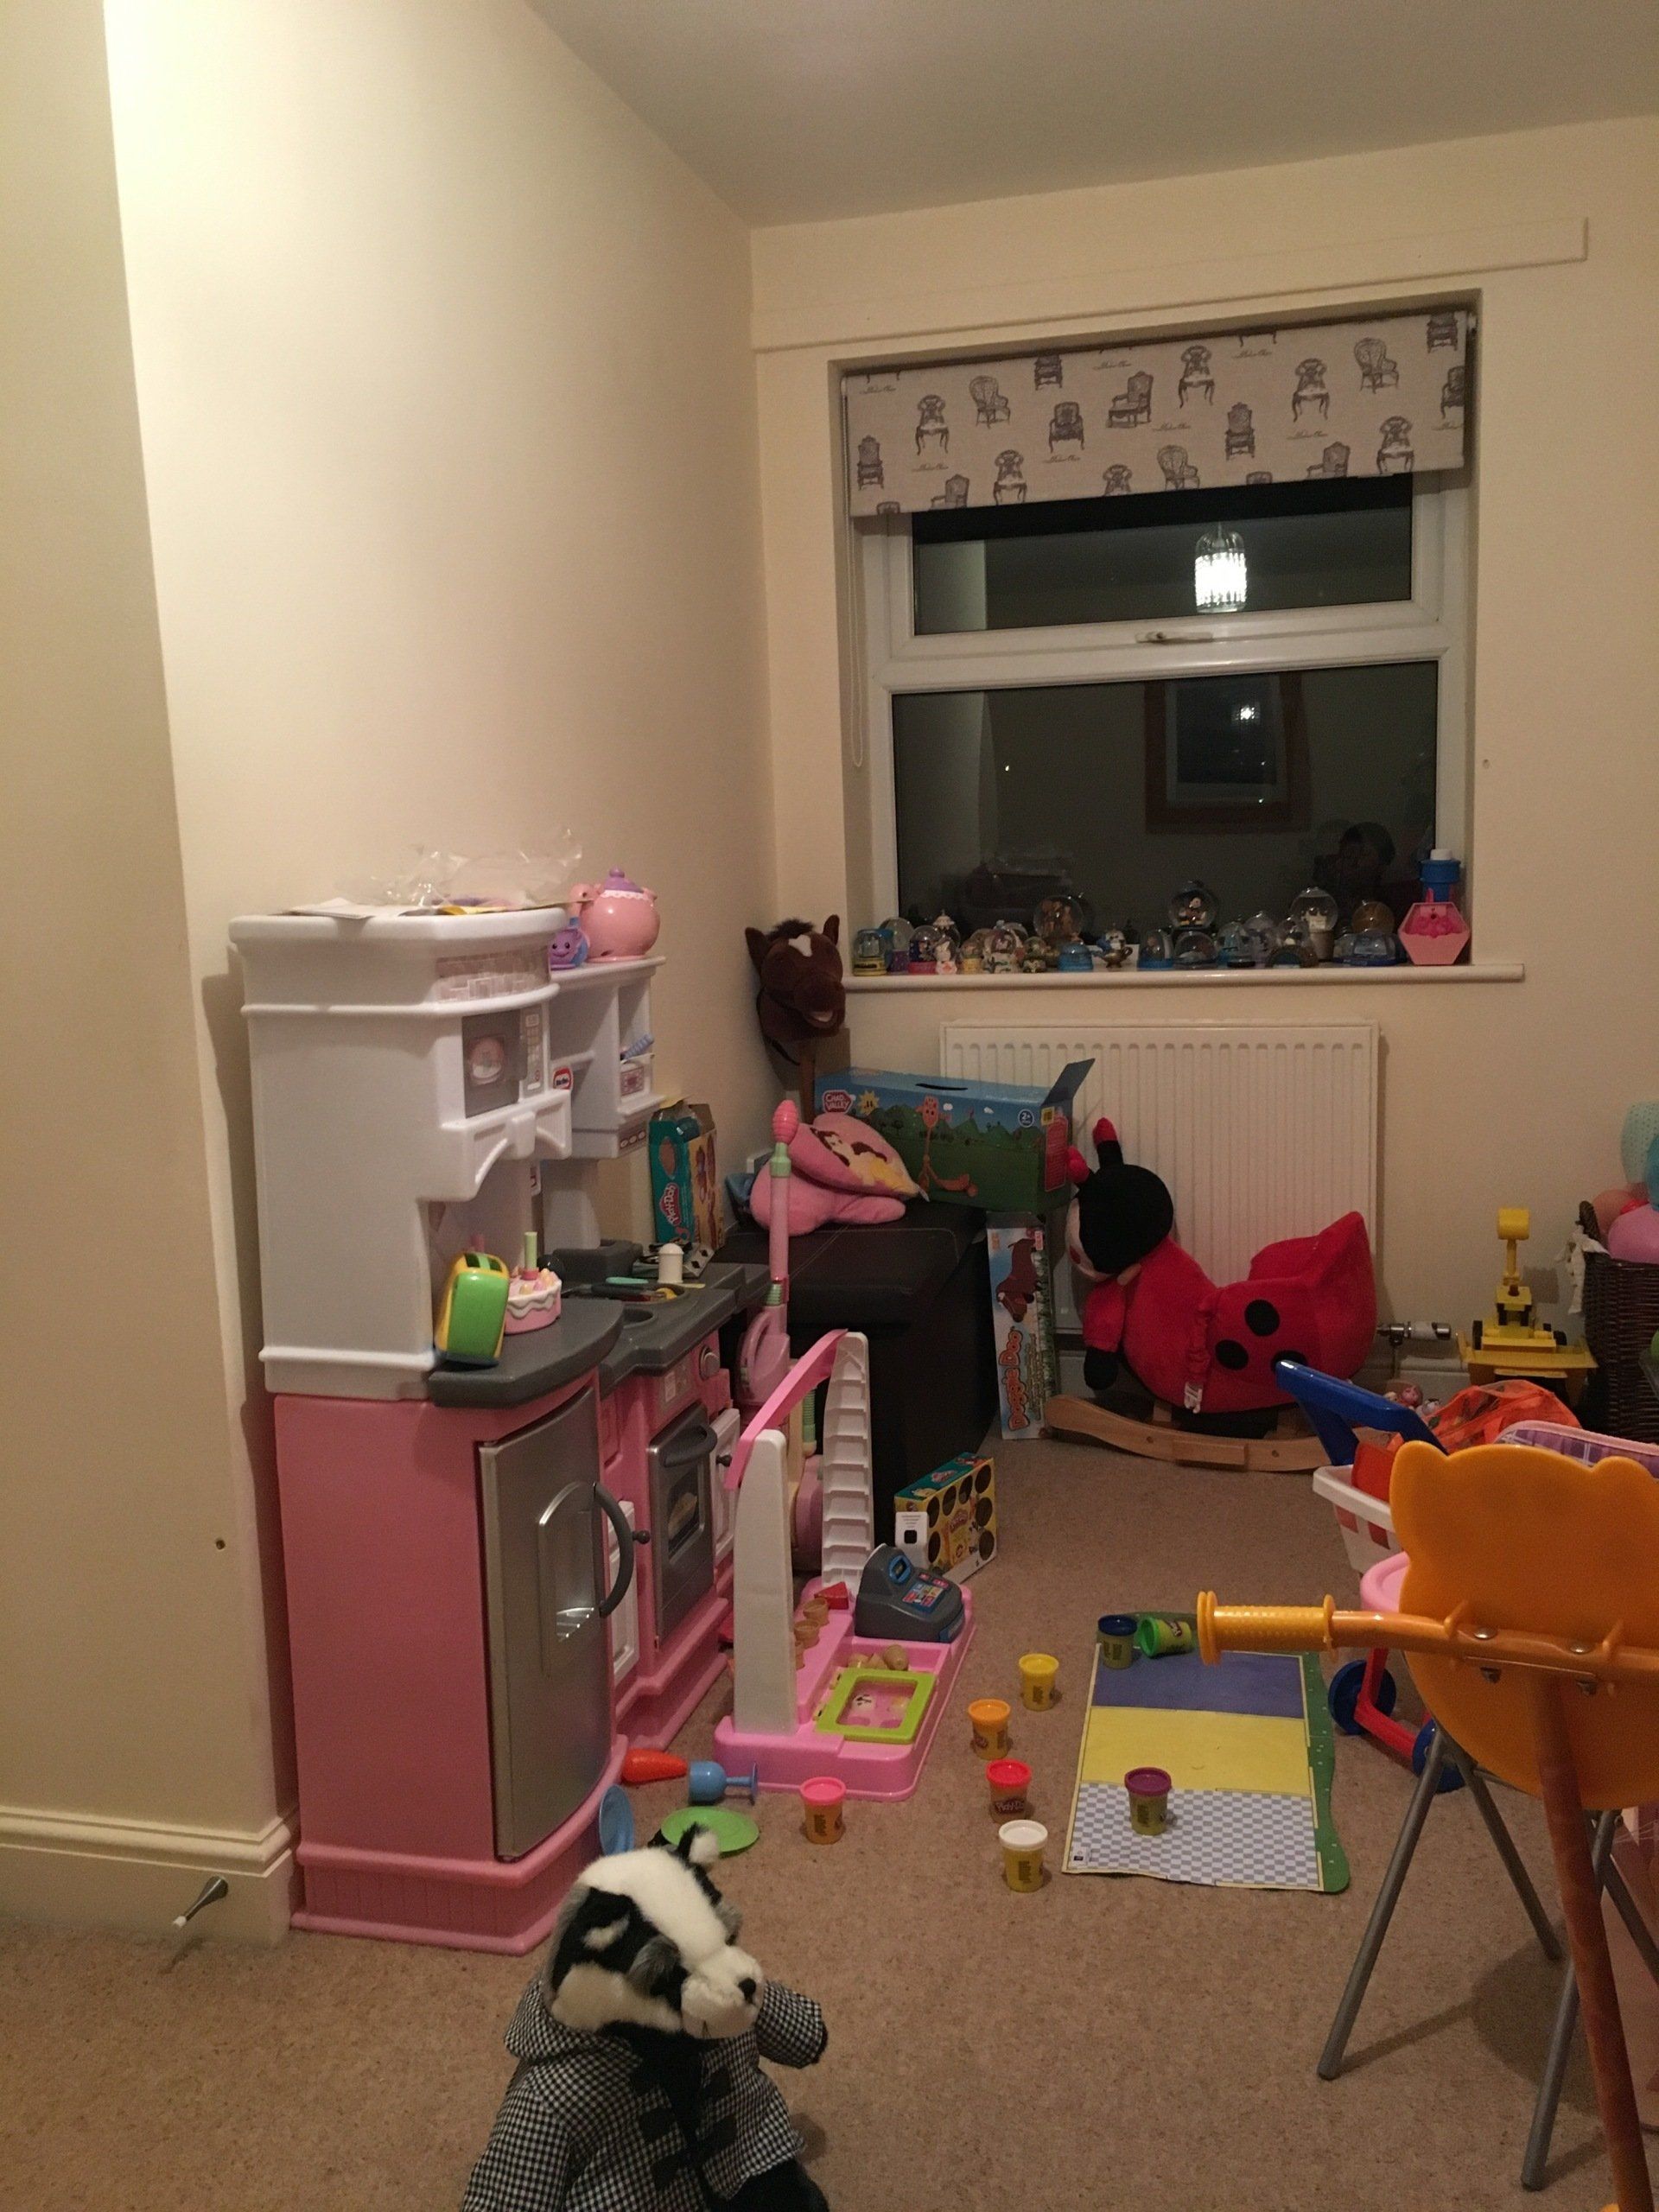 Before the organising of a child's bedroom started